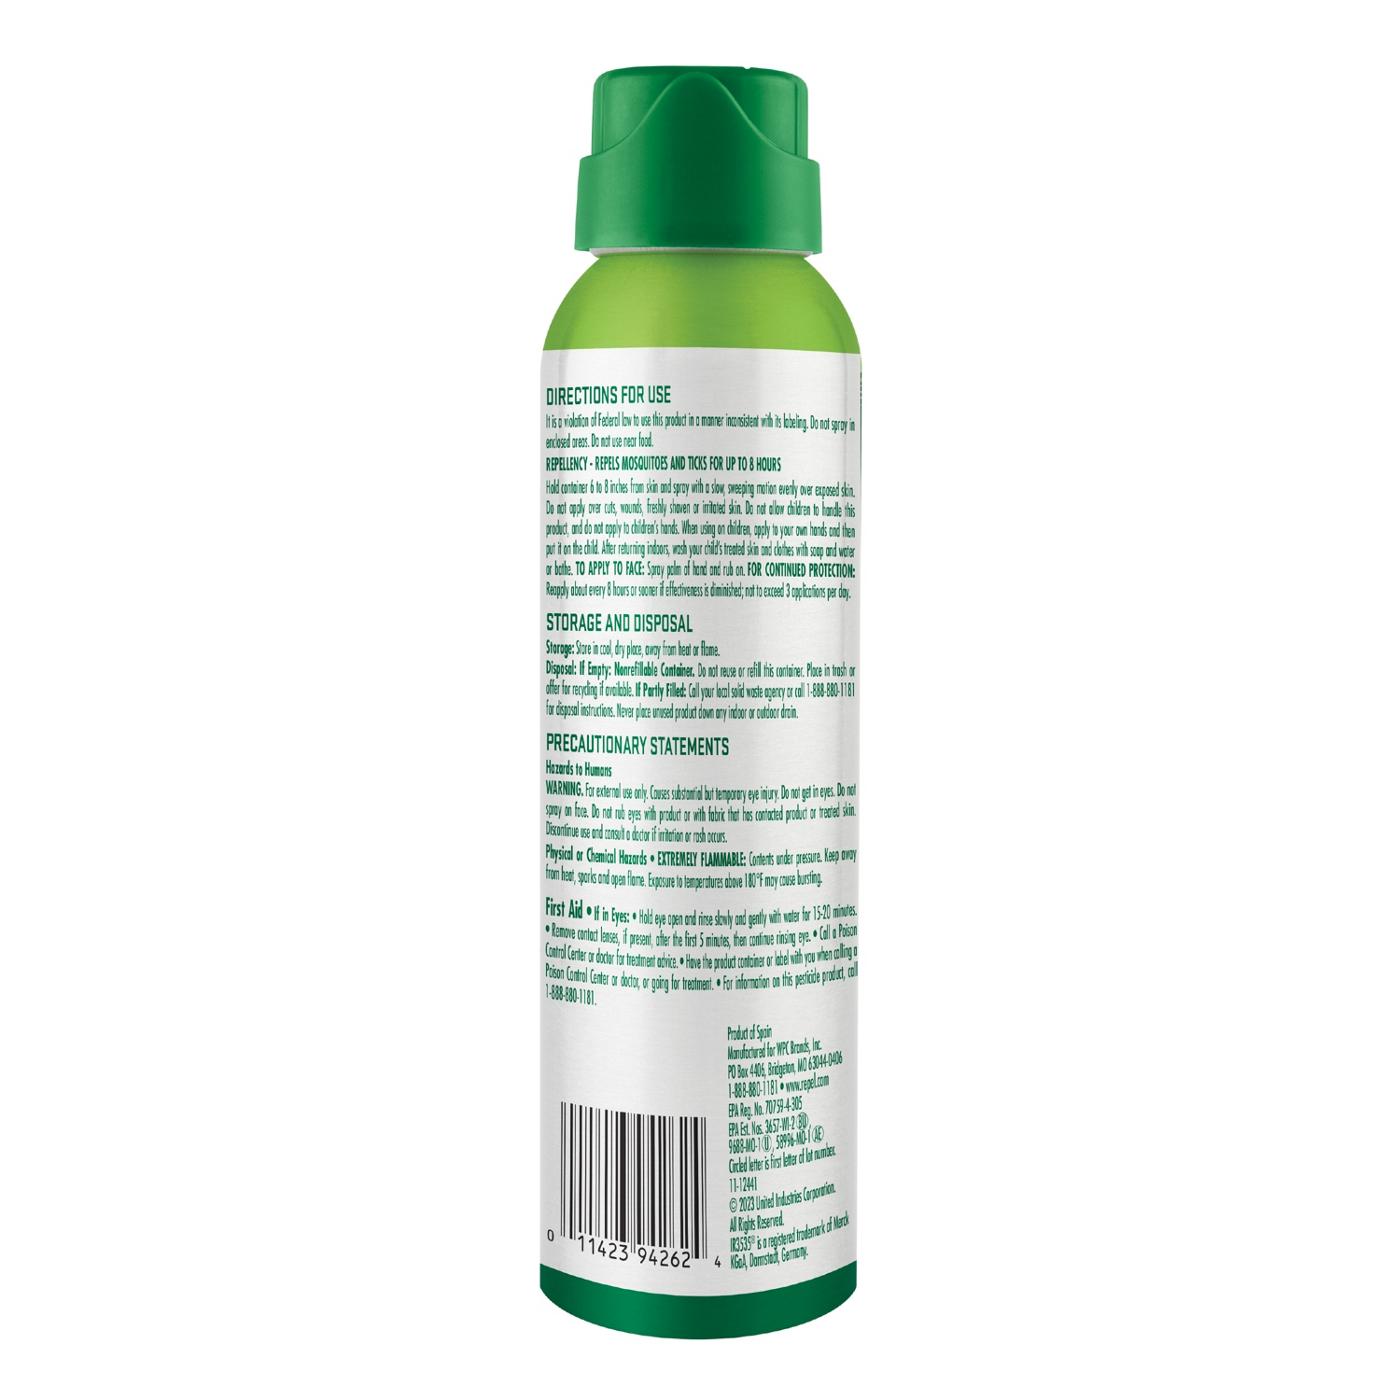 Repel Family Insect Repellent Spray; image 2 of 2